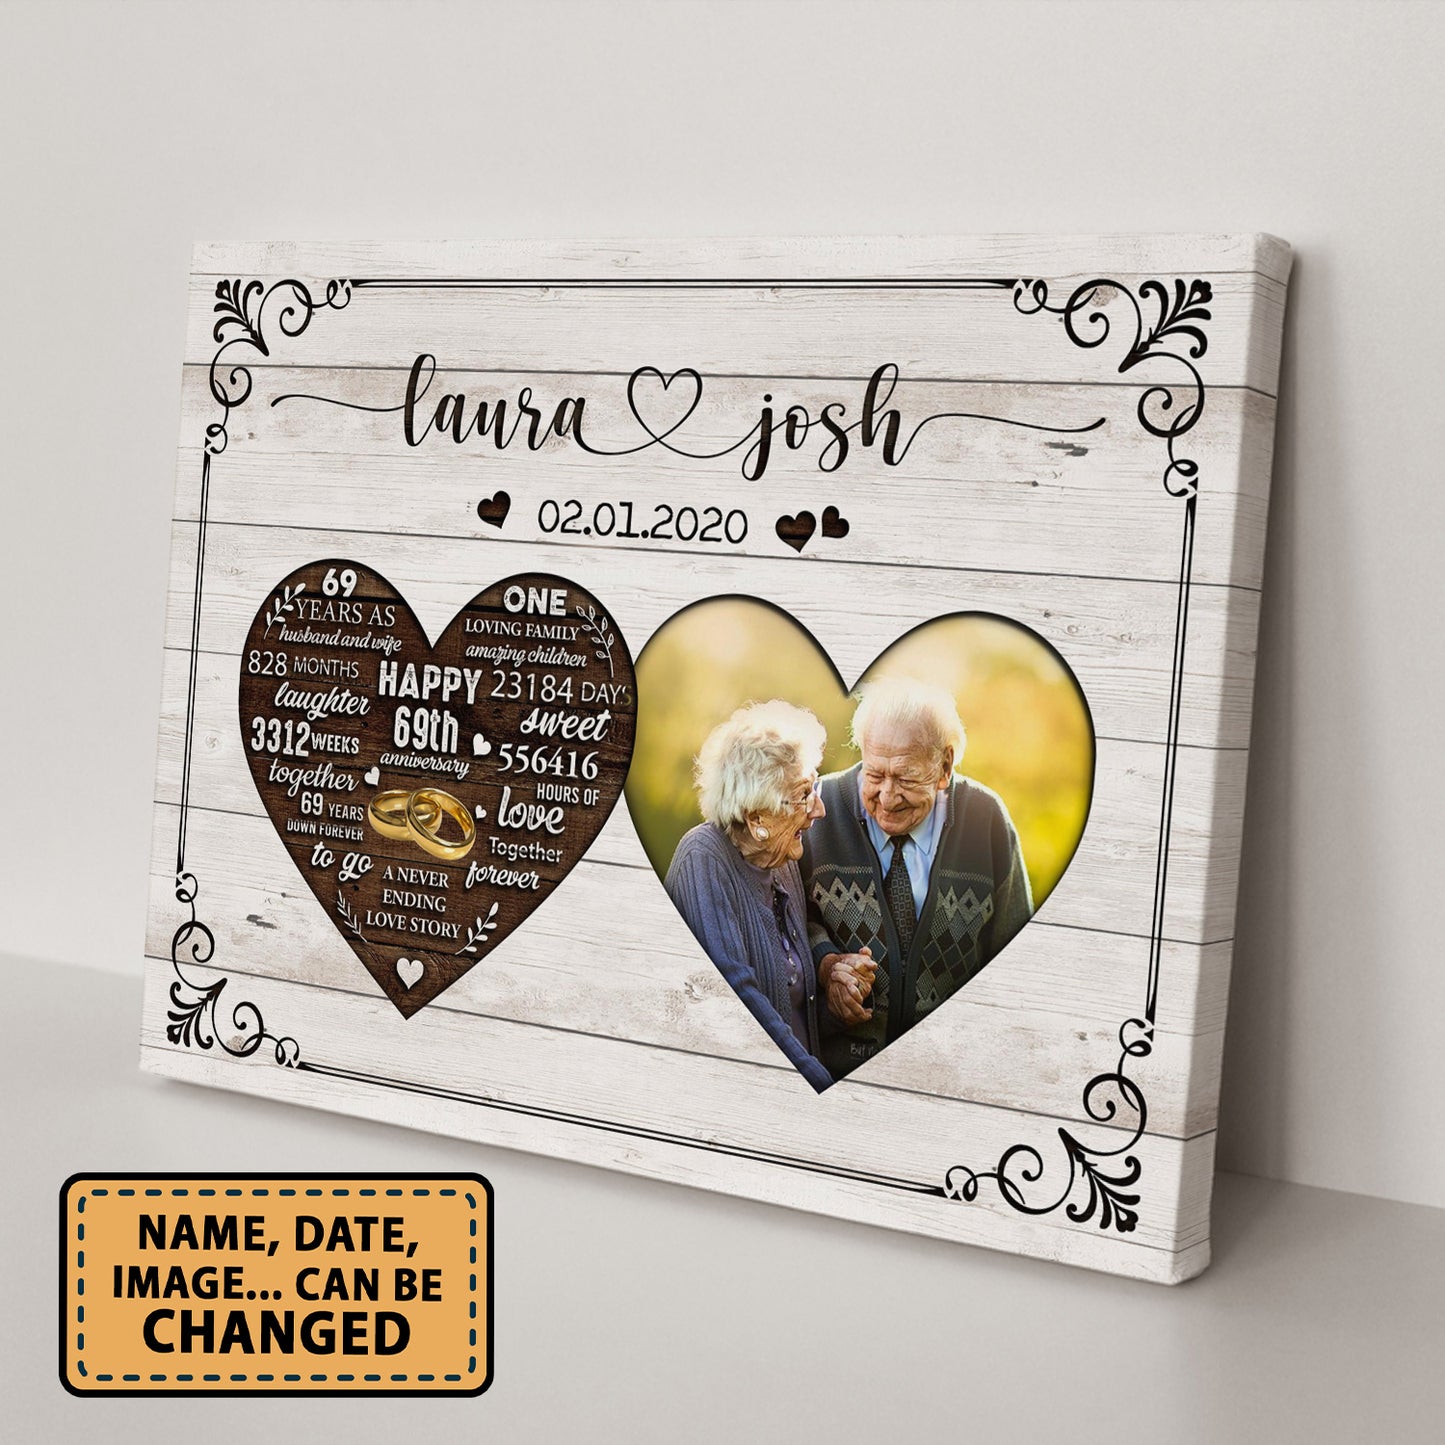 Happy 69th Anniversary As Husband And Wife Anniversary Canvas